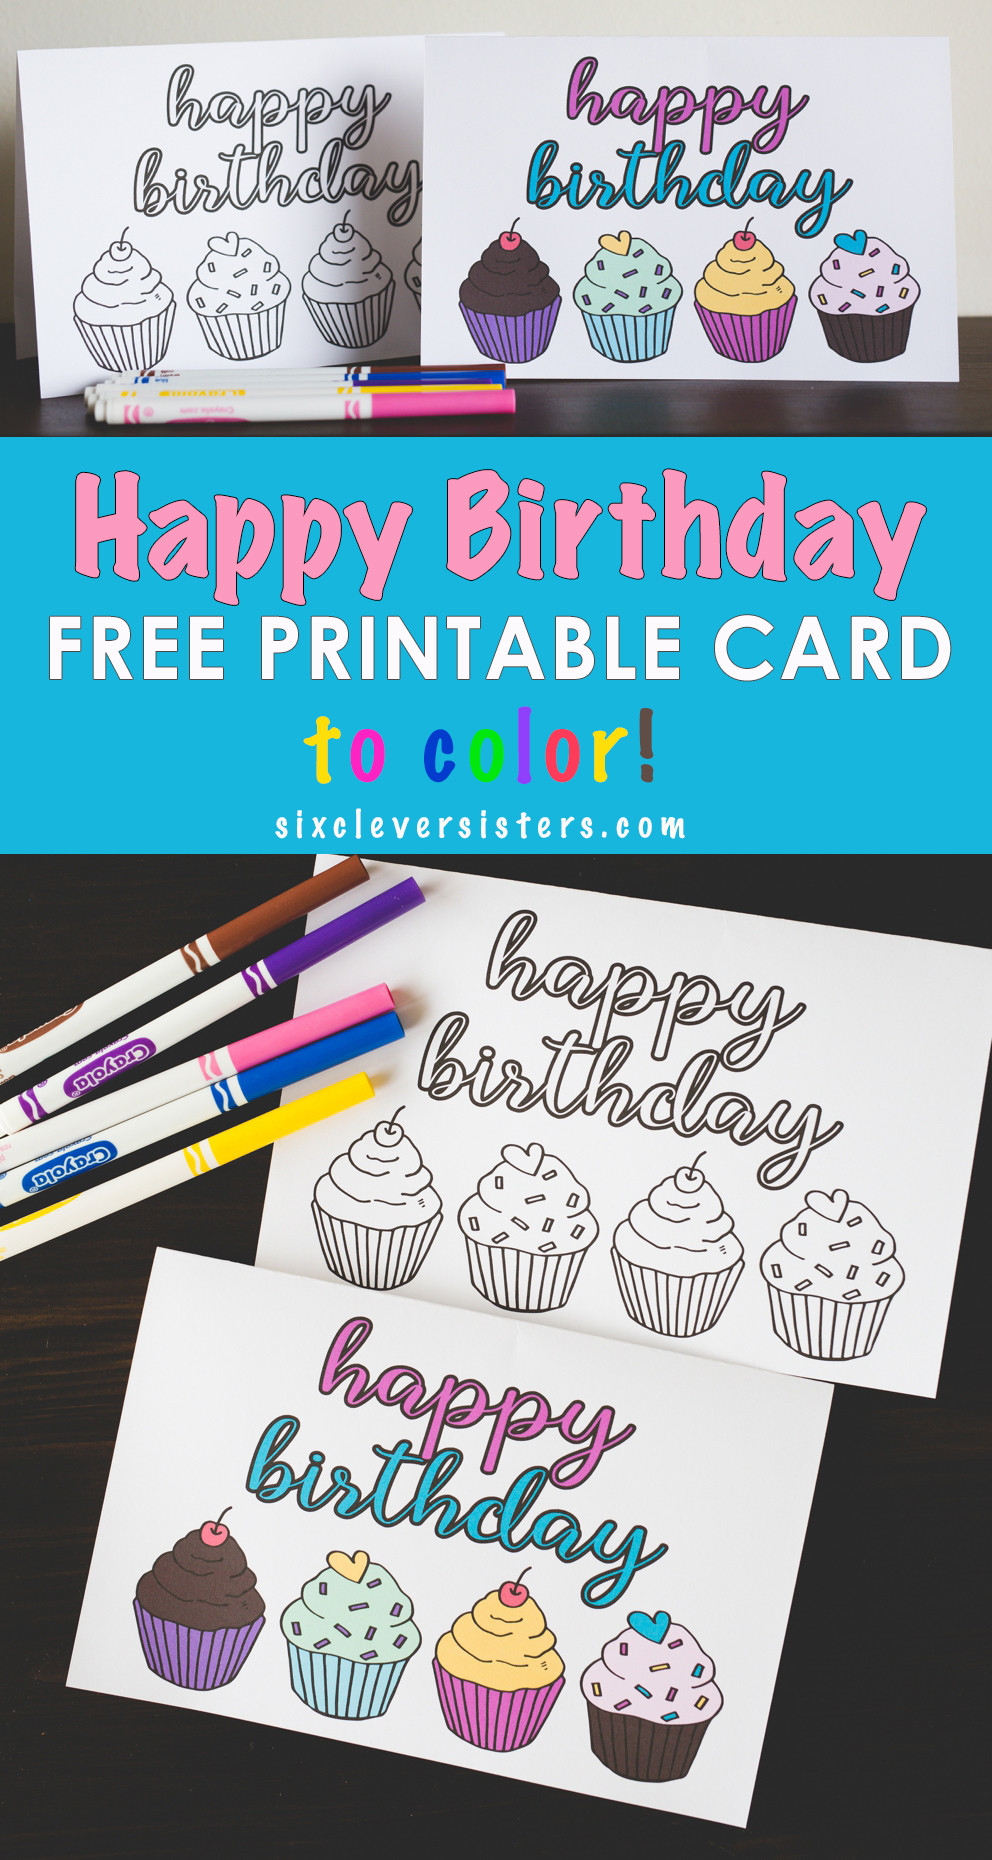 Free Birthday Card Printable
 FREE Printable Happy Birthday Card Six Clever Sisters